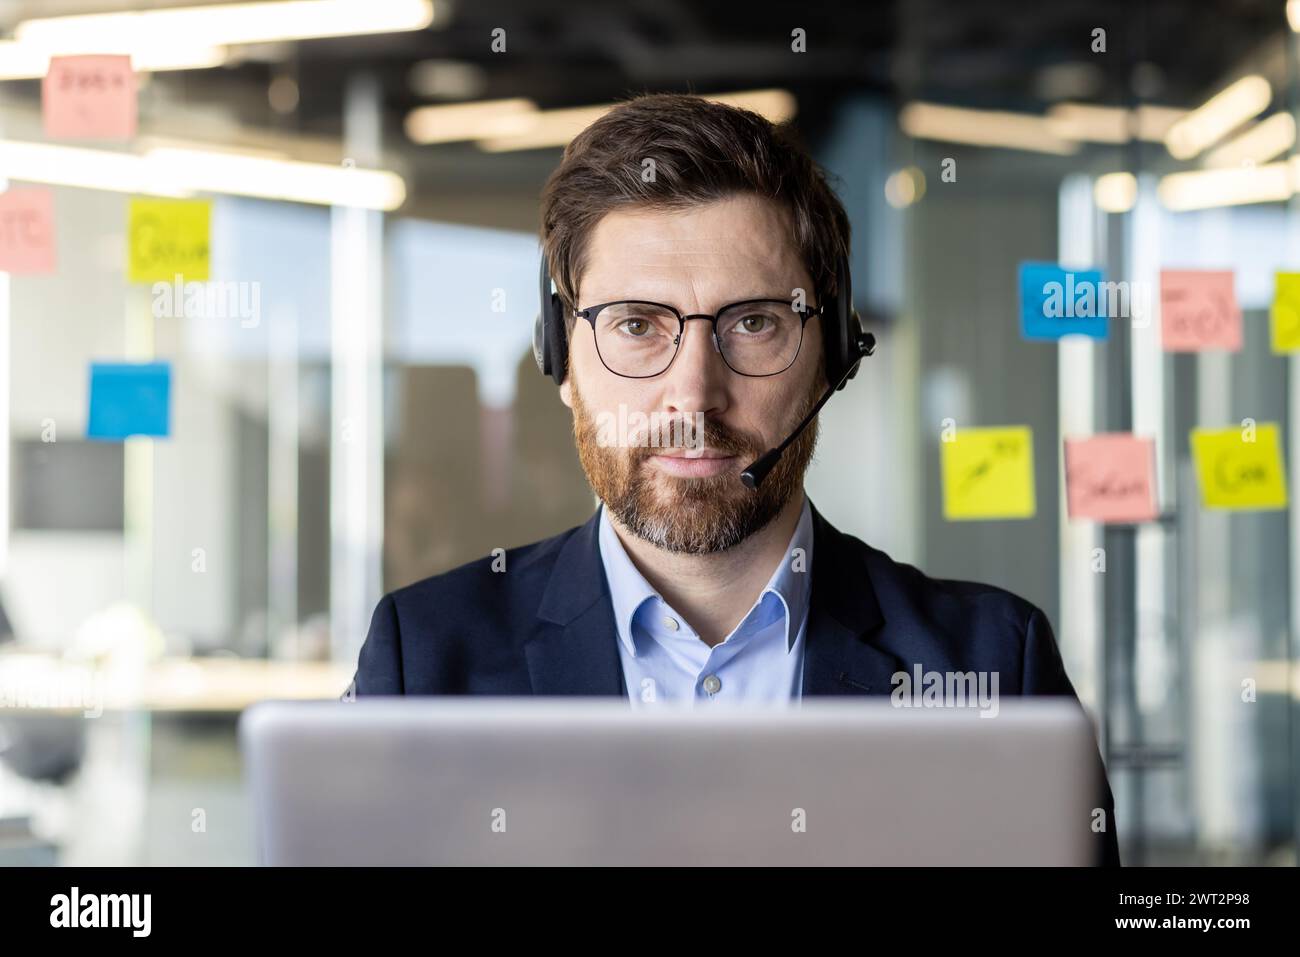 Professional male in business attire with headset using a laptop, sticky notes in background, in an office setting. Stock Photo